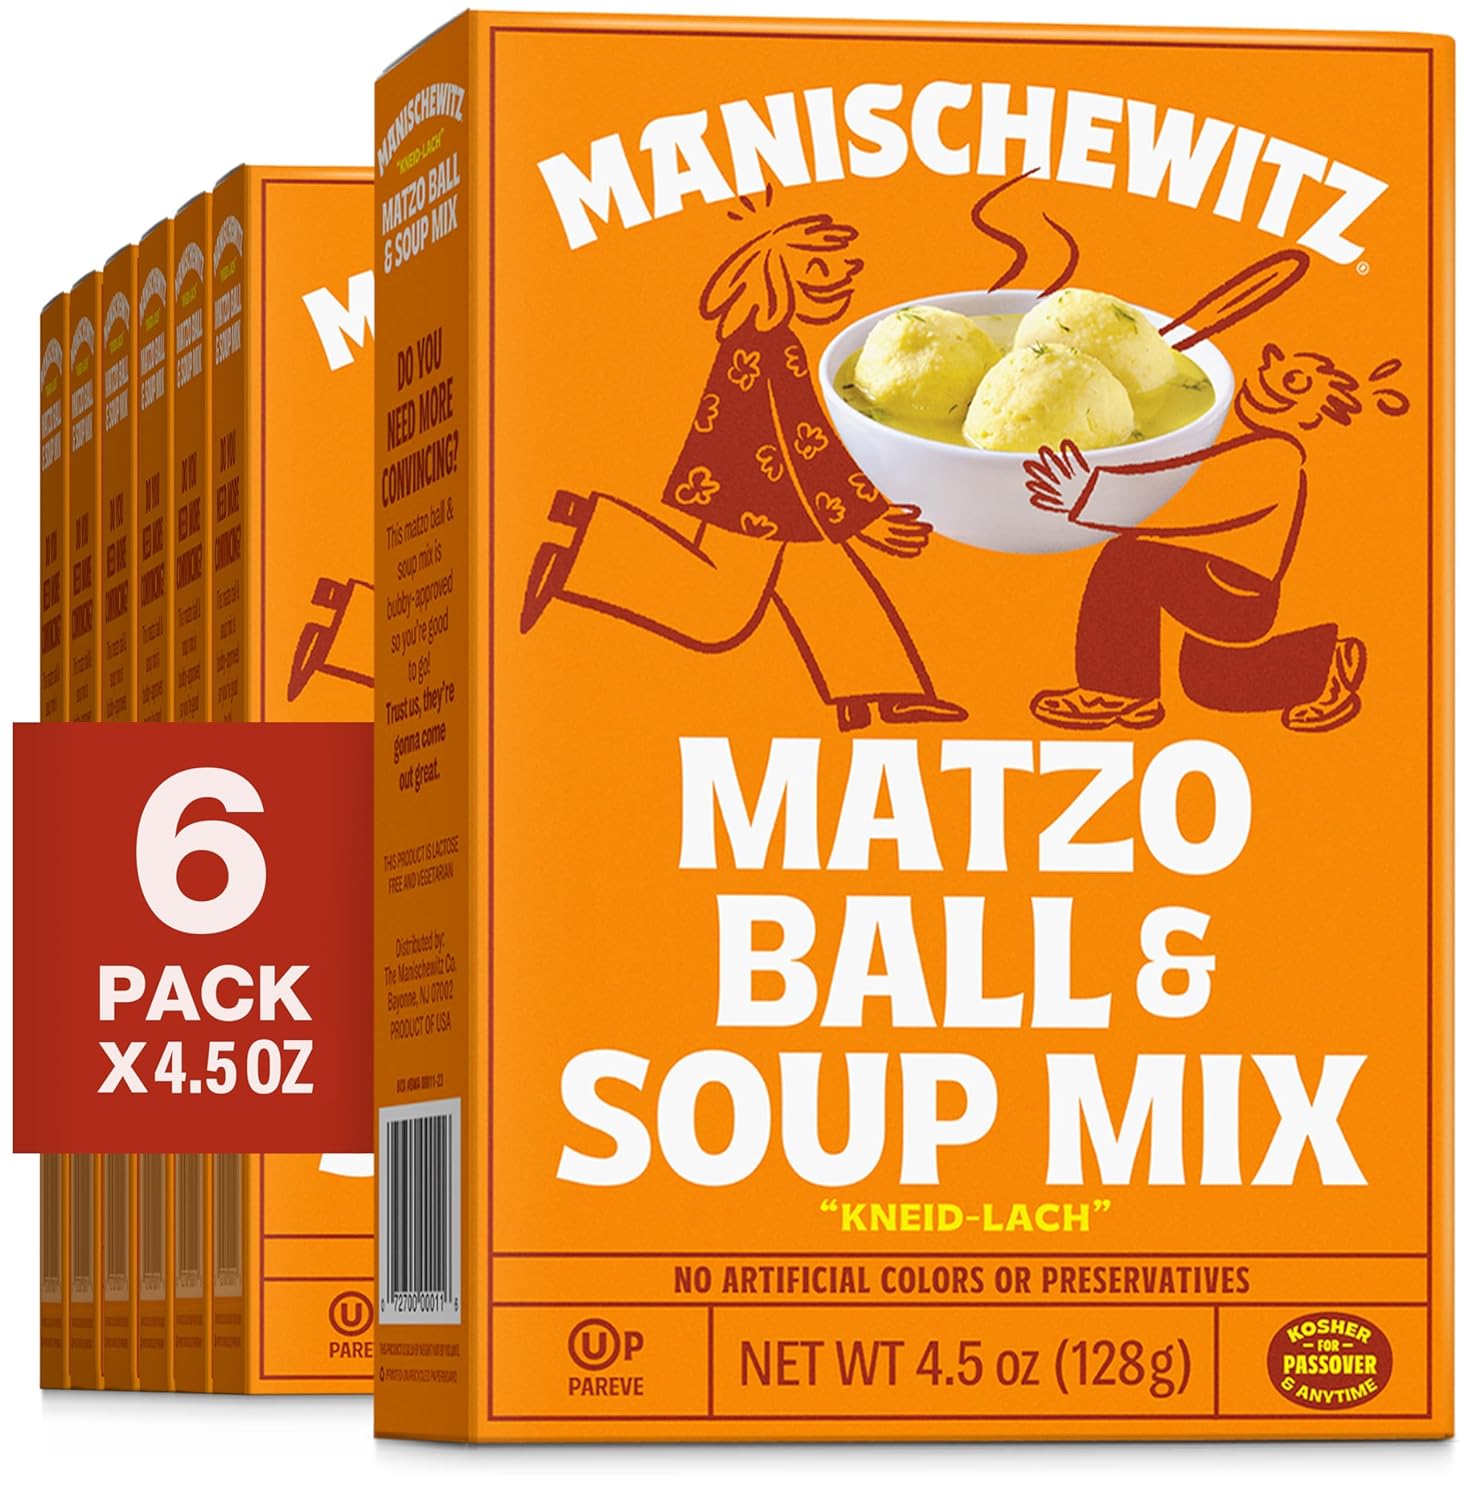 Manischewitz Matzo Ball and Soup Mix, 4.5oz Box (Pack of 6, Total of 27 Oz)